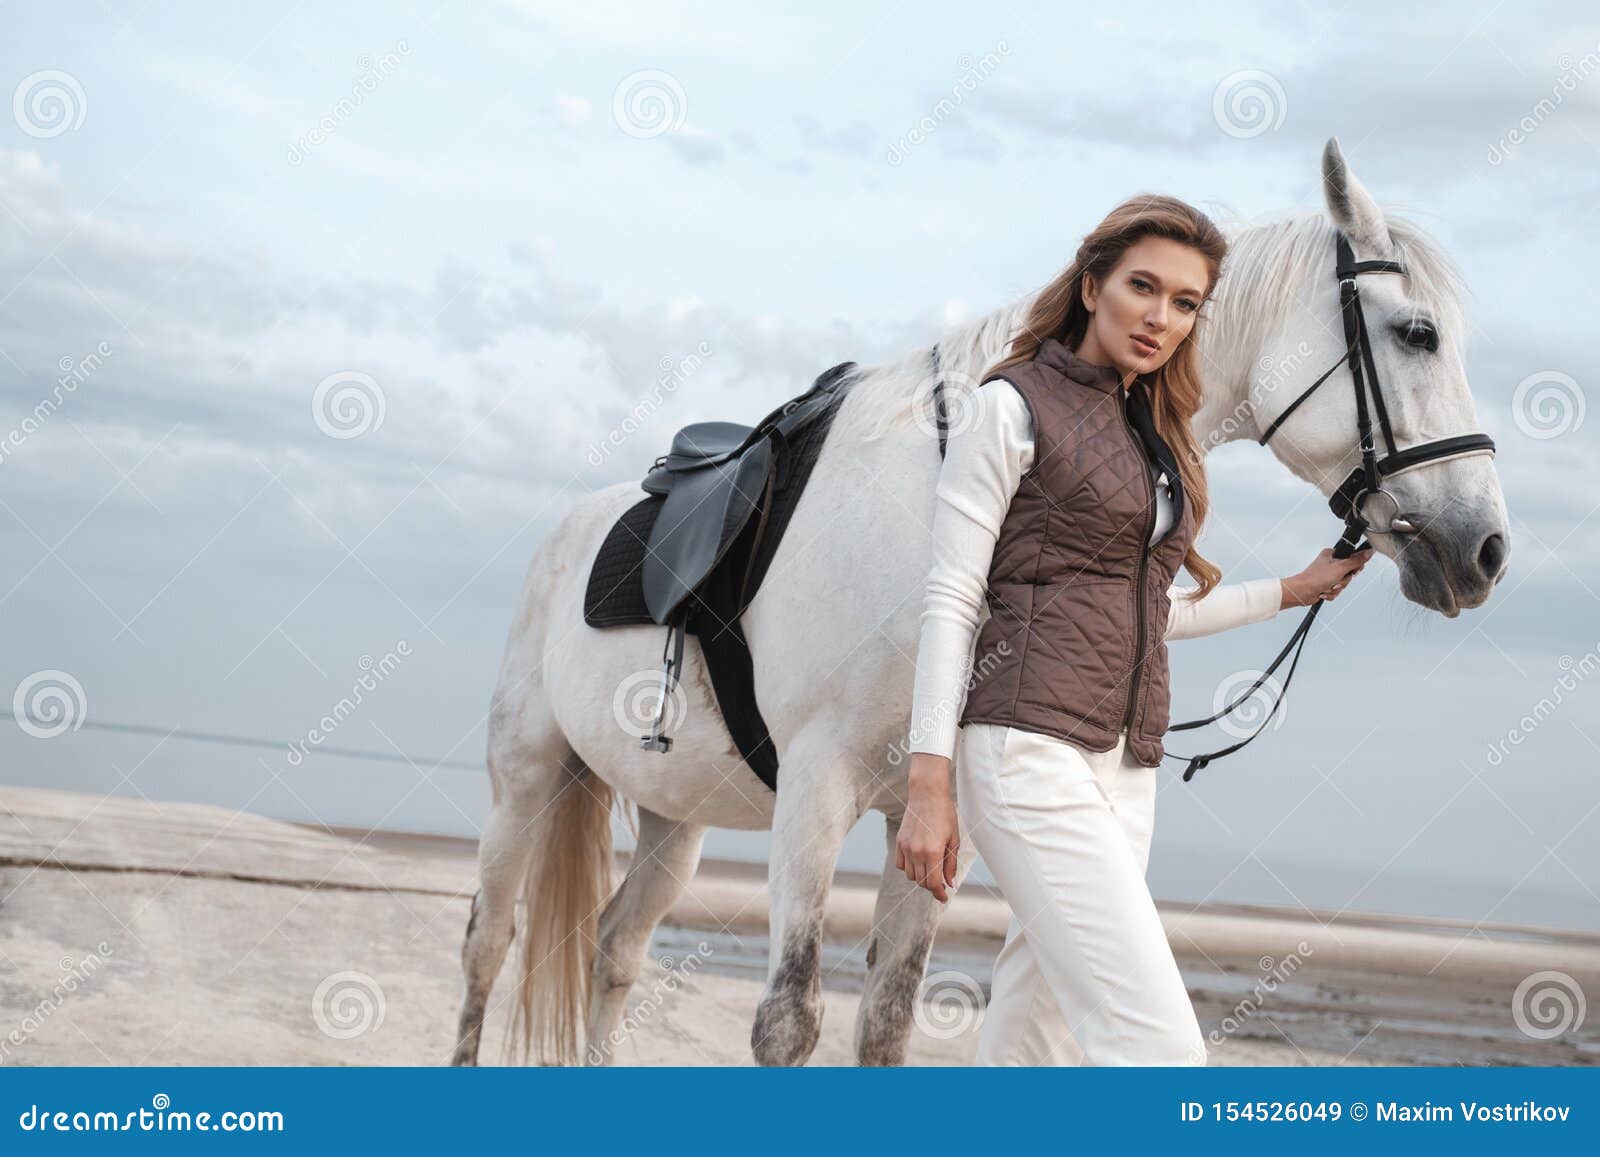 charming and beautiful young woman wearing stylish jockey outfit is holding the reins and posing with the white horse